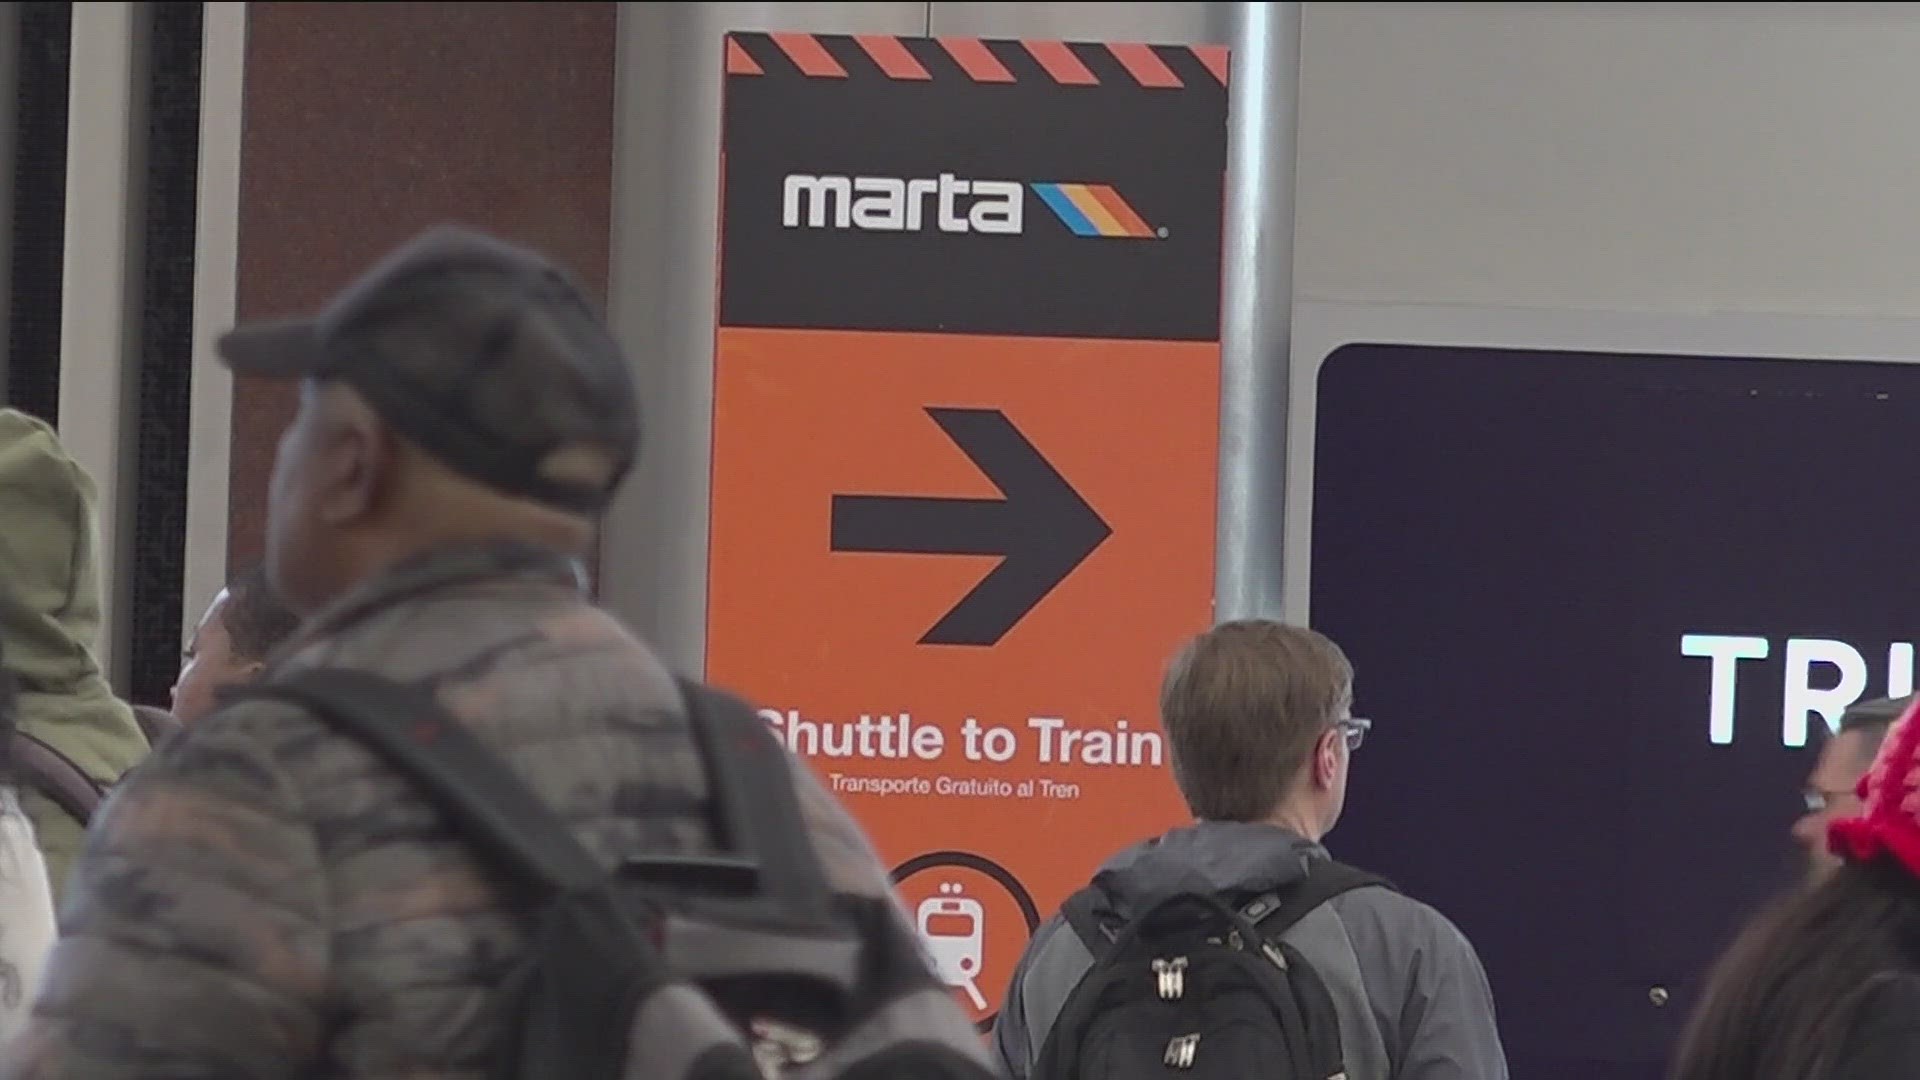 MARTA says you should allow for about 12 minutes between buses.